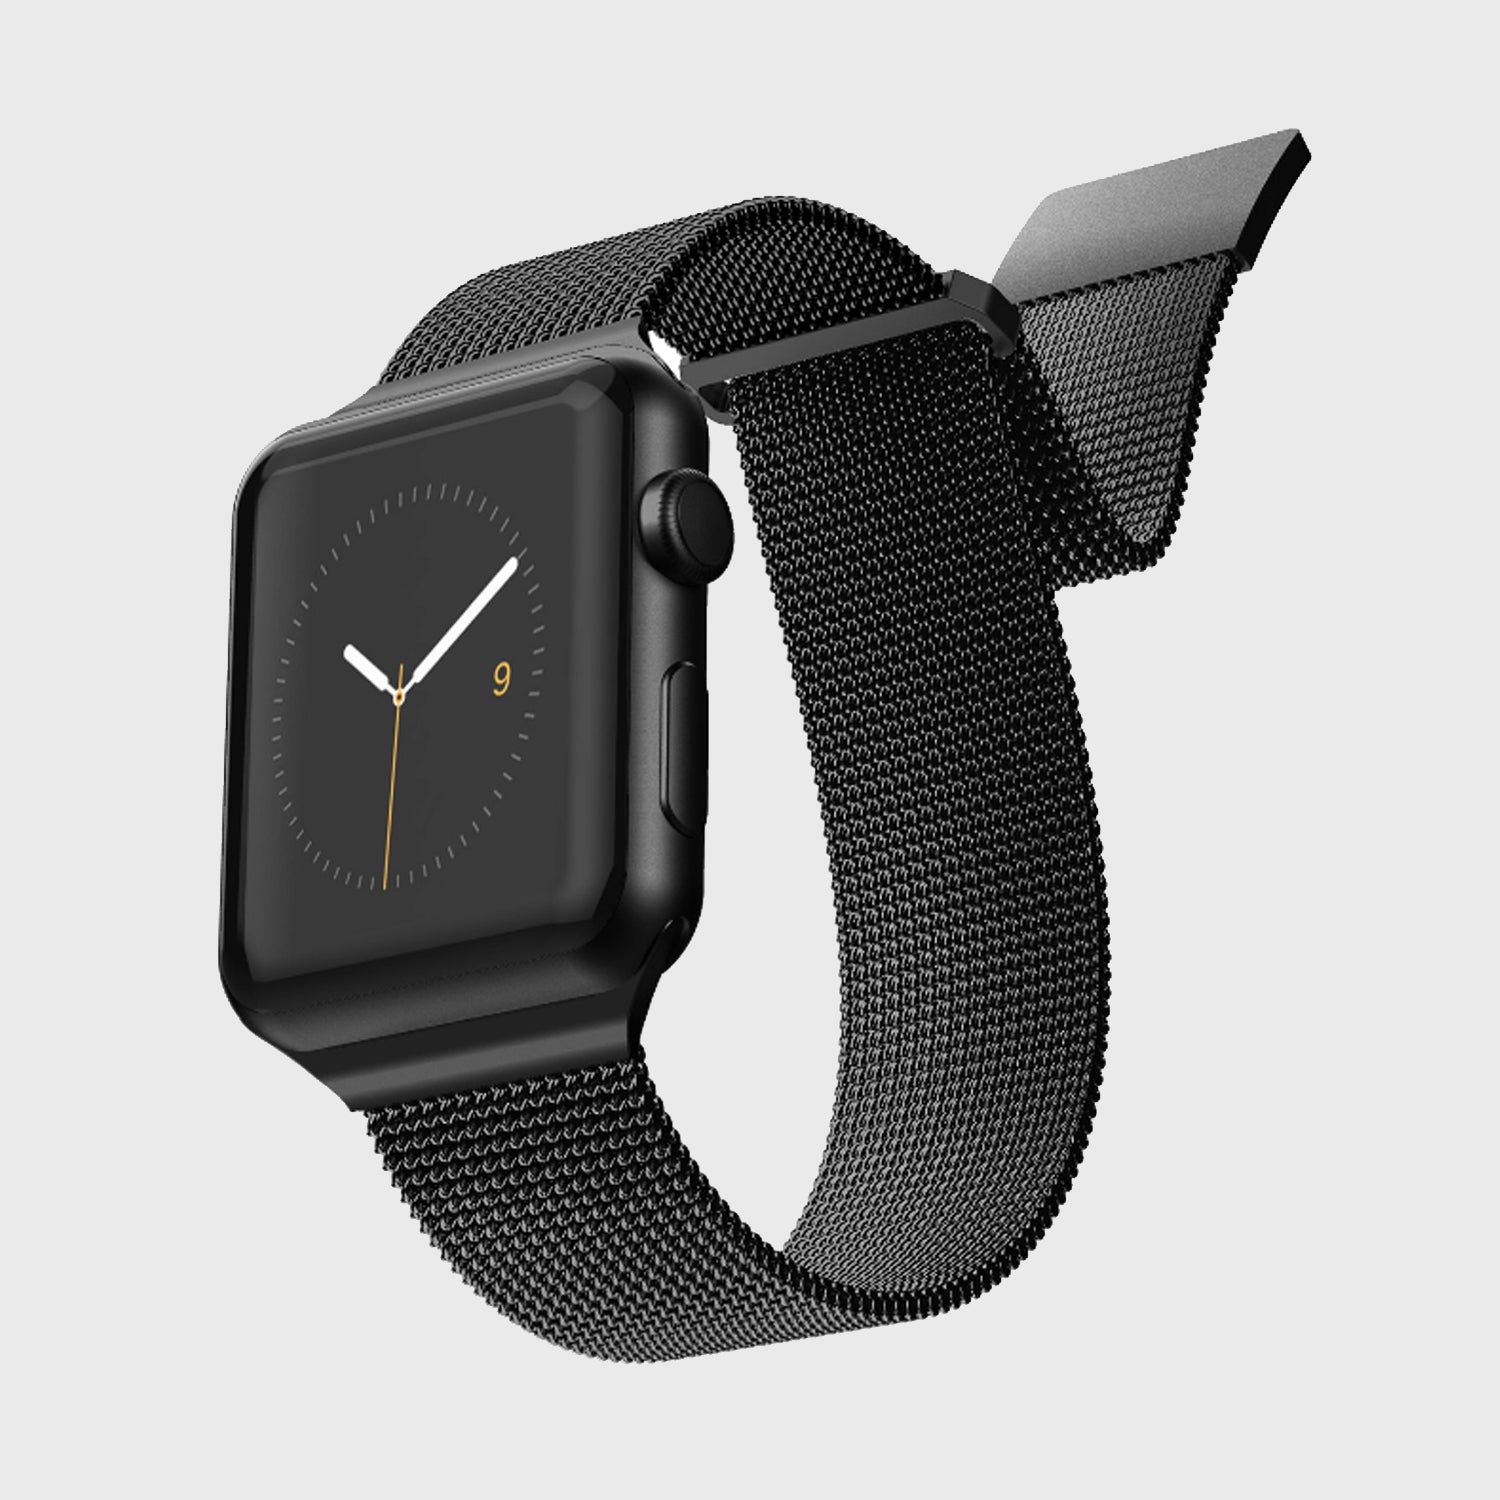 An Apple Watch with a Raptic stainless steel black mesh band.